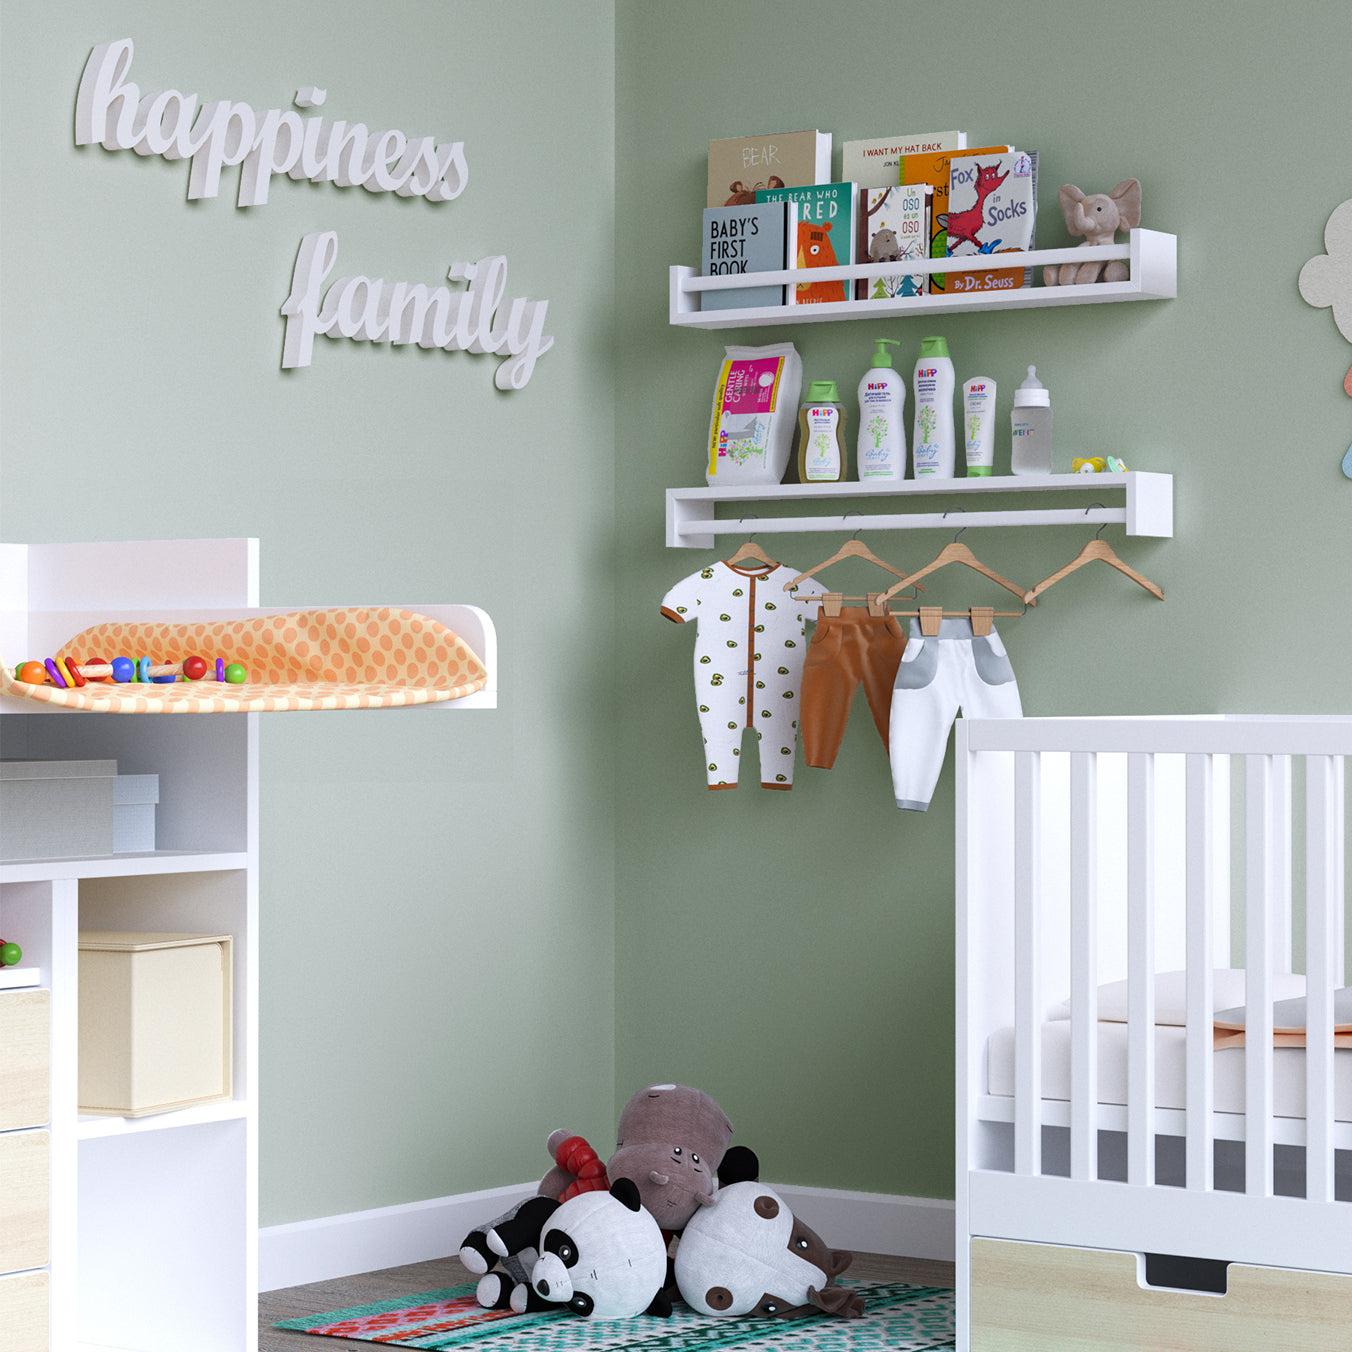 A nursery with two floating white shelves for kids, one holding books and baby products, the other with hanging baby clothes, next to a crib and play area with stuffed animals.